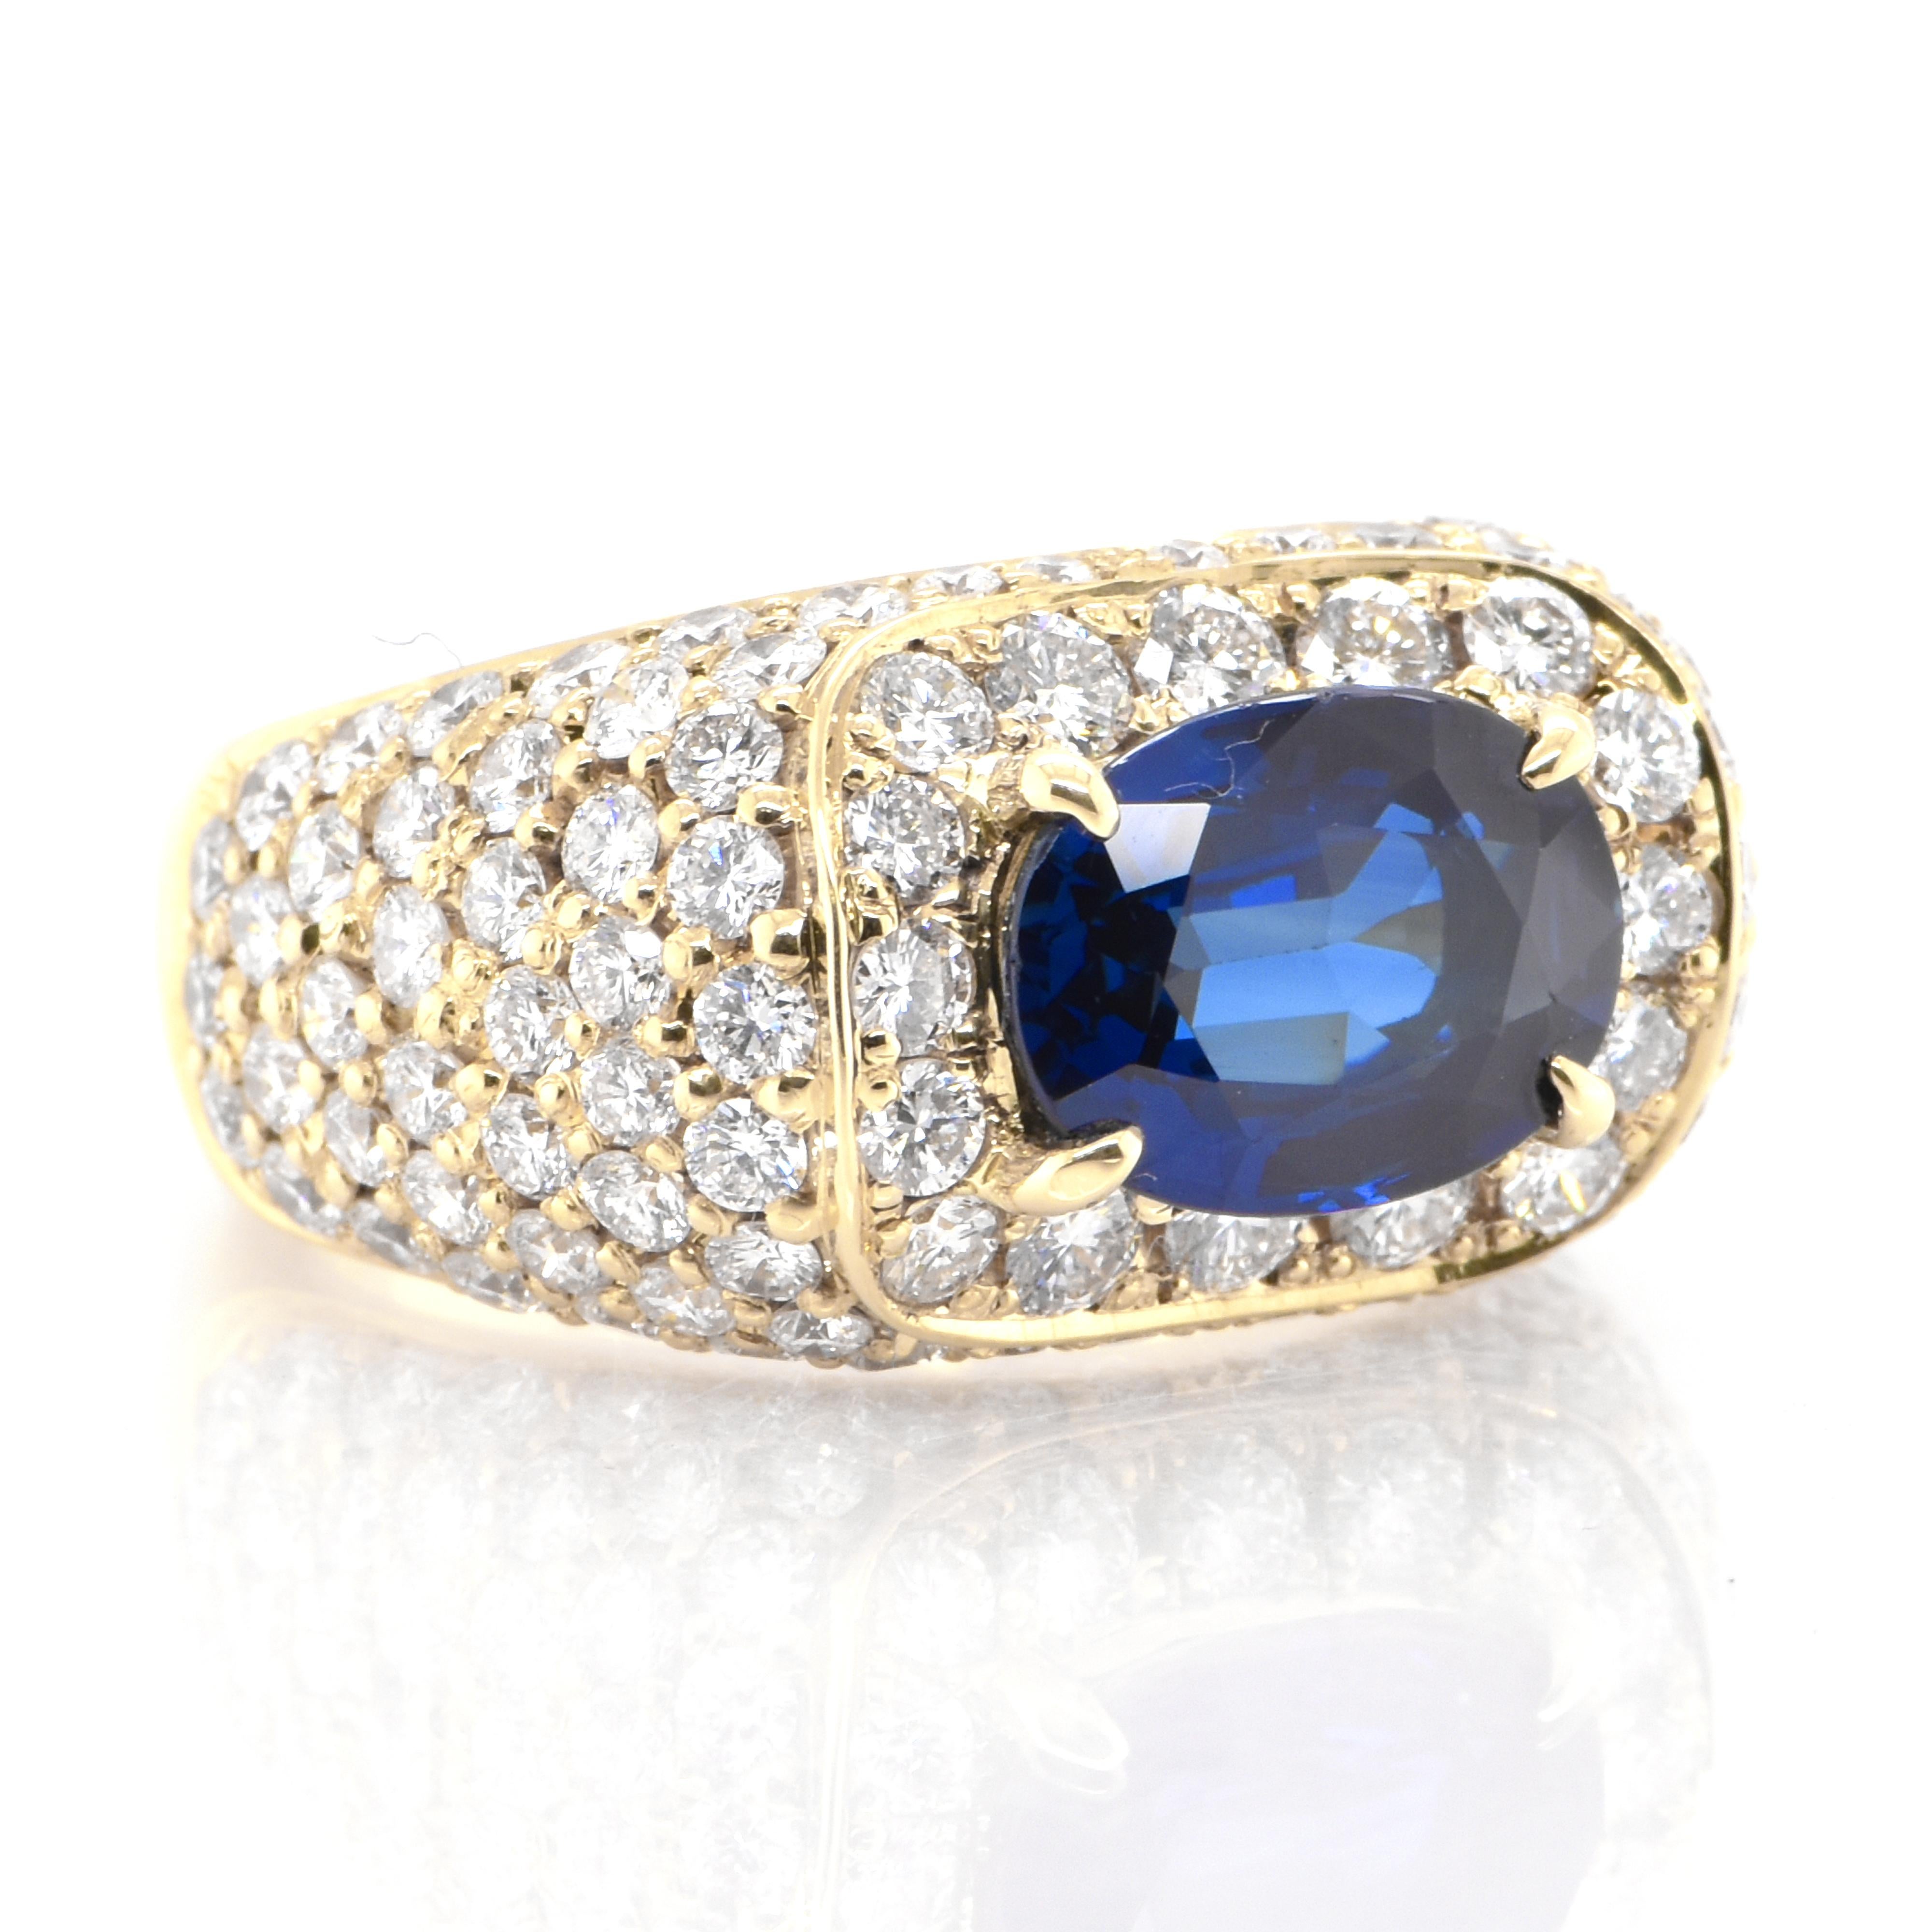 Modern 3.47 Carat Natural Sapphire and Diamond Cocktail Ring Set in 18K Yellow Gold For Sale